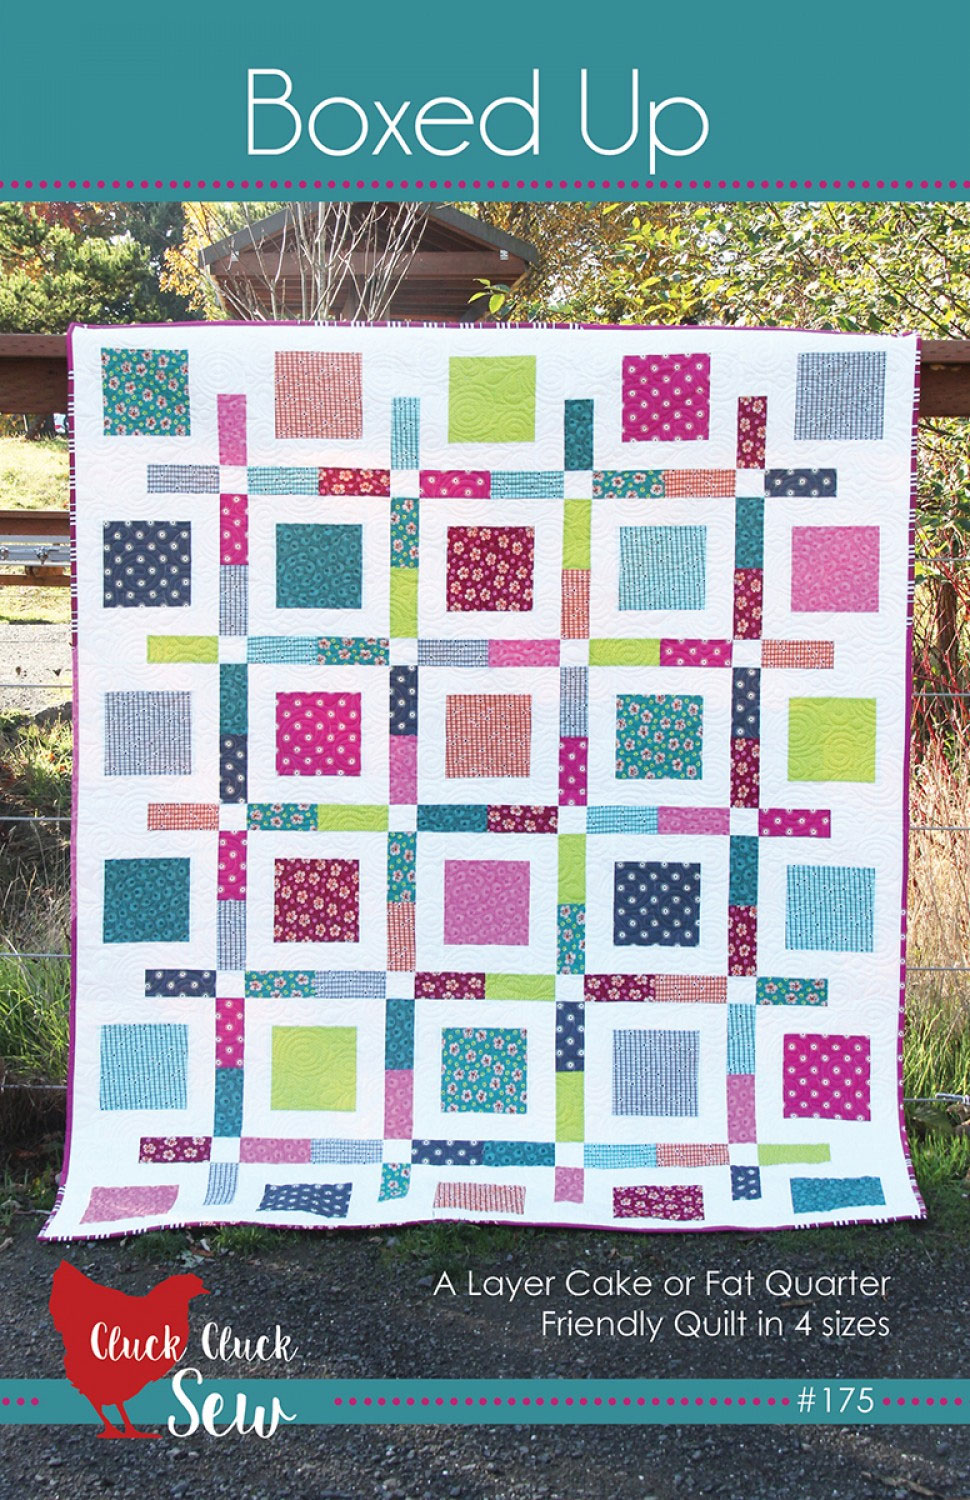 Boxed-Up-quilt-sewing-pattern-Cluck-Cluck-Sew-front